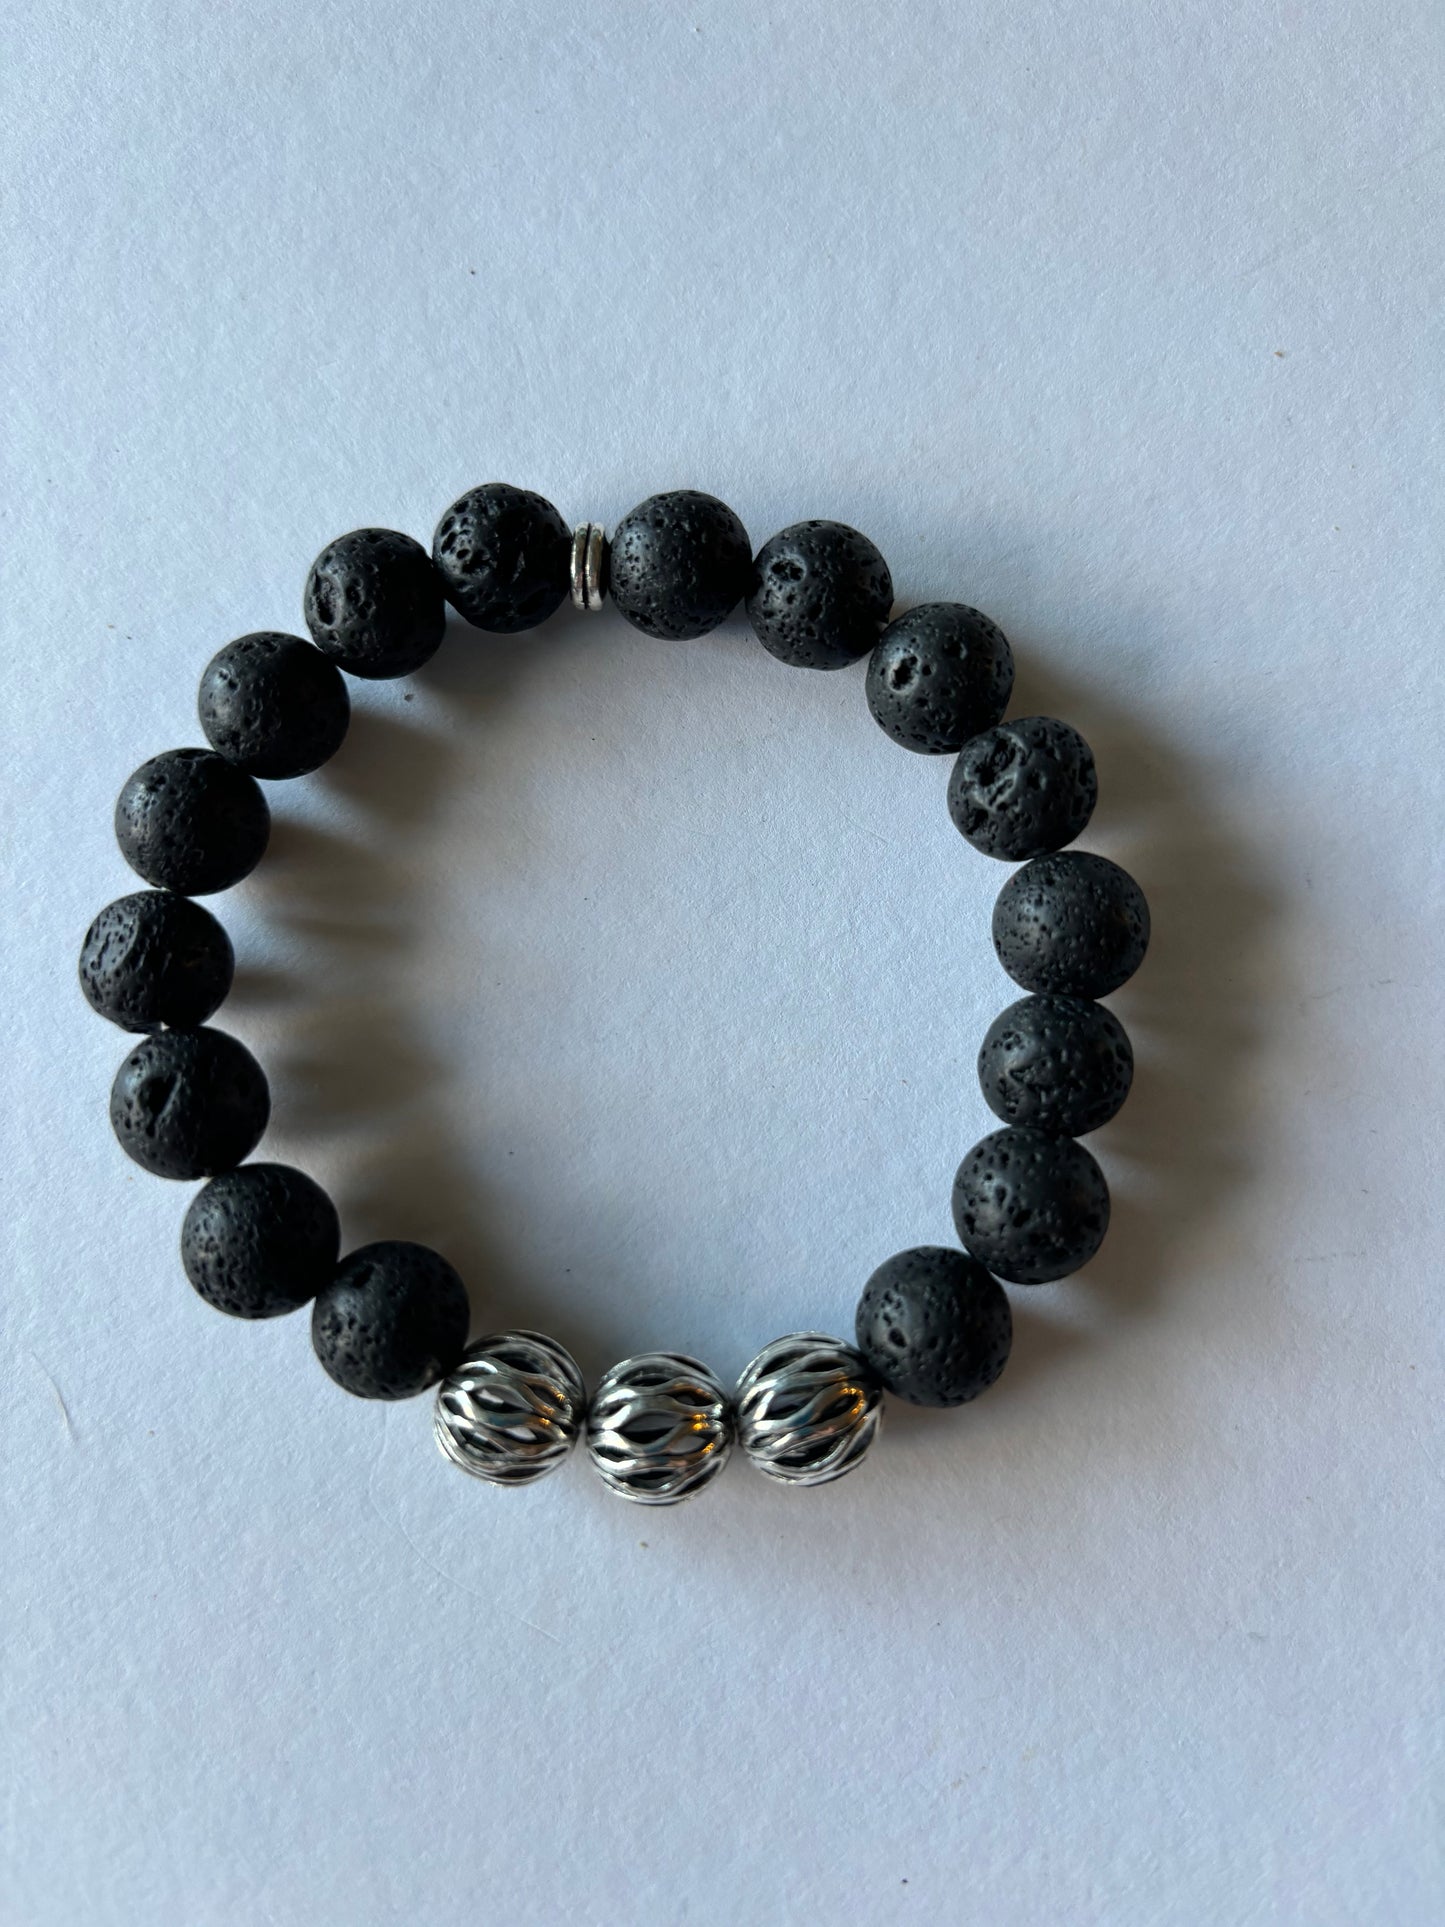 8 MM Black Lava Bead Stretch Bracelet with Silver Beads